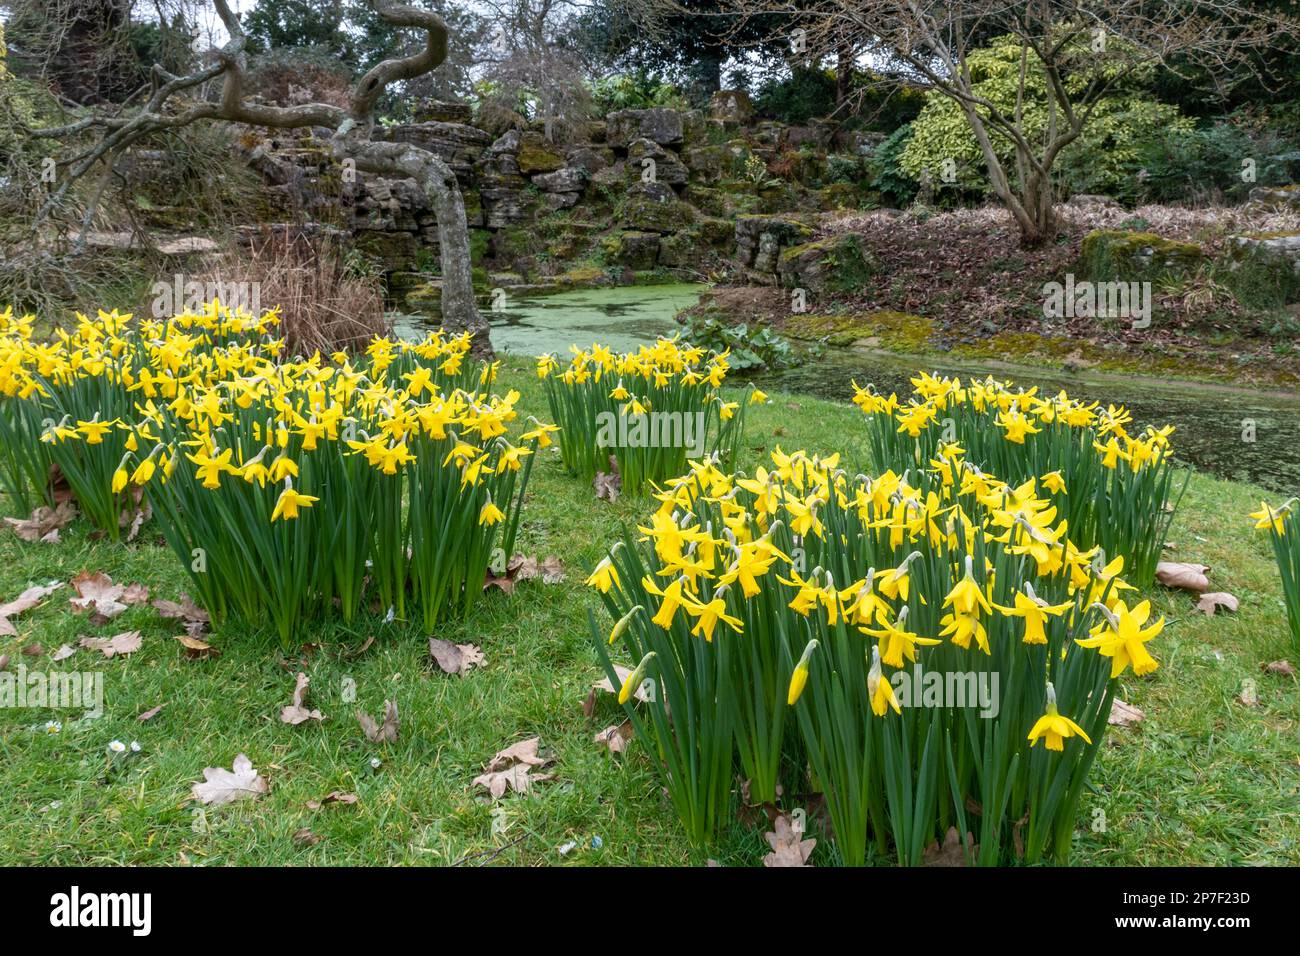 Daffodils in Stoke Park Gardens in Guildford, Surrey, England, UK, during March or spring Stock Photo